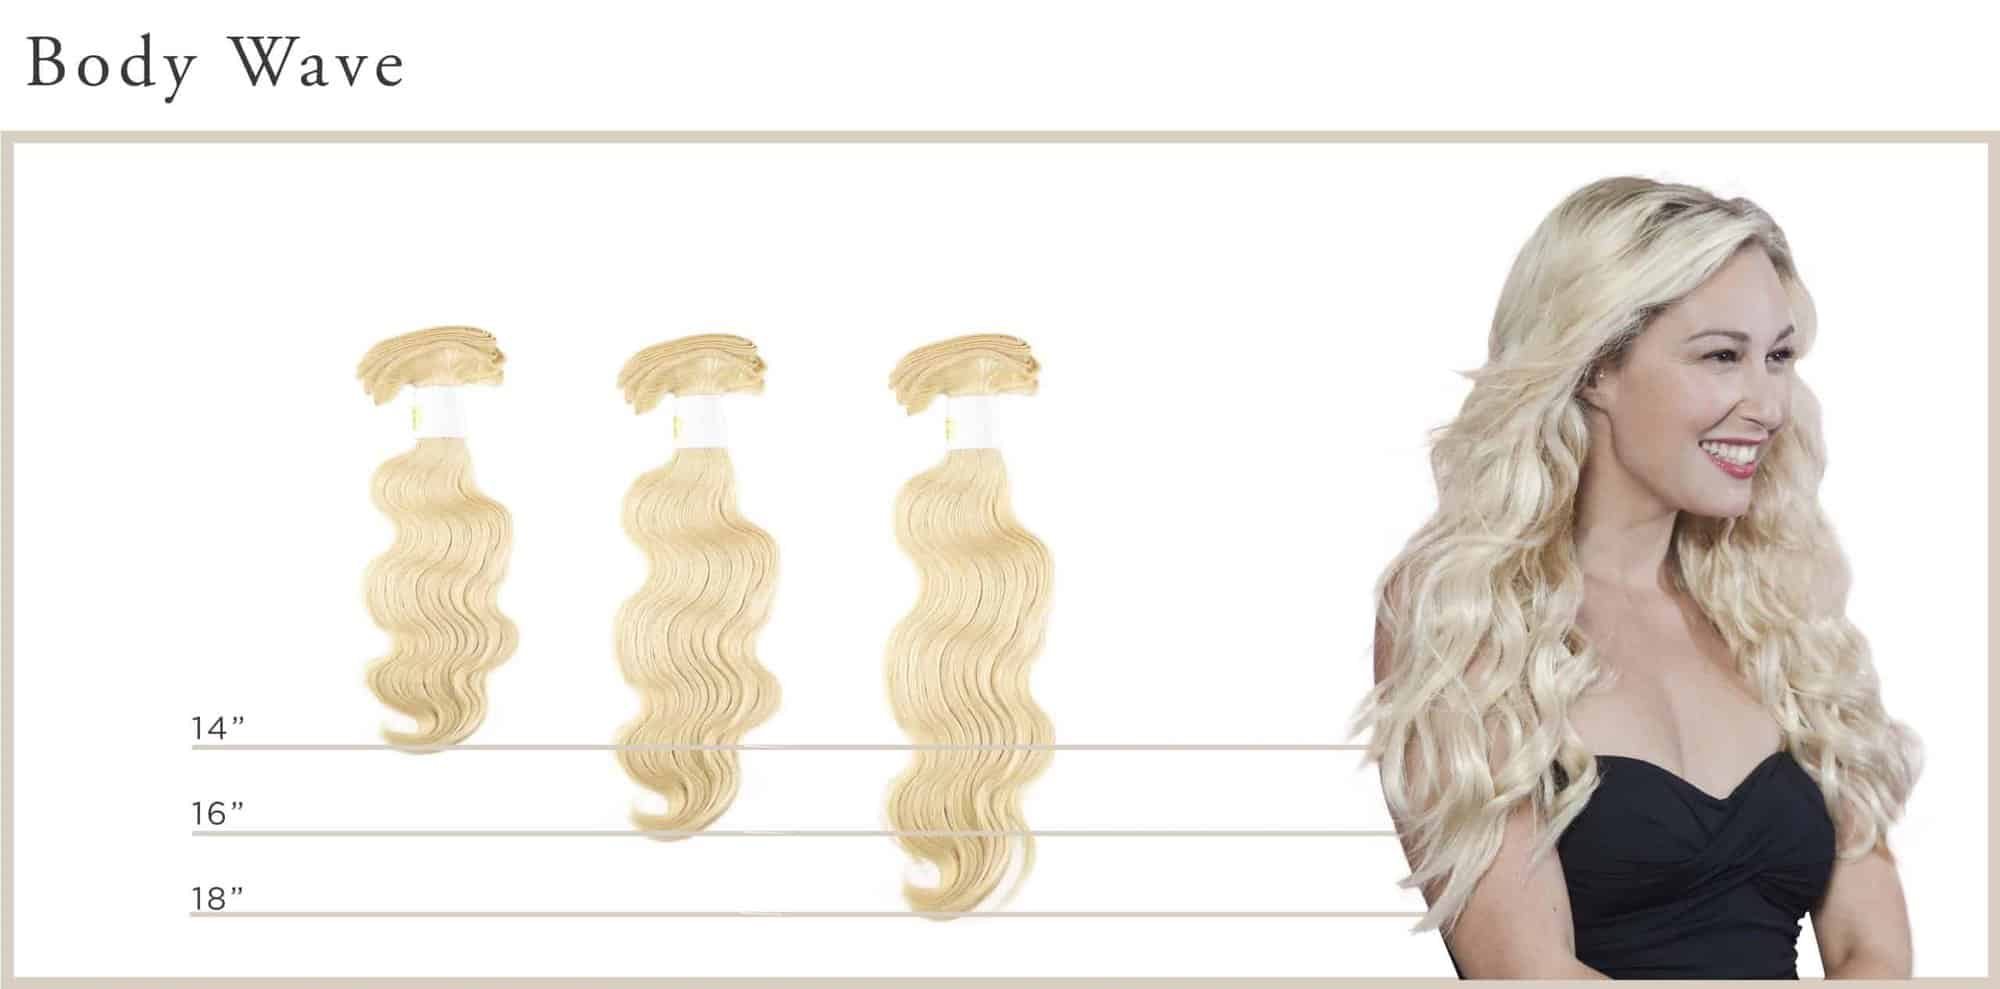 Body Wave Length Guide